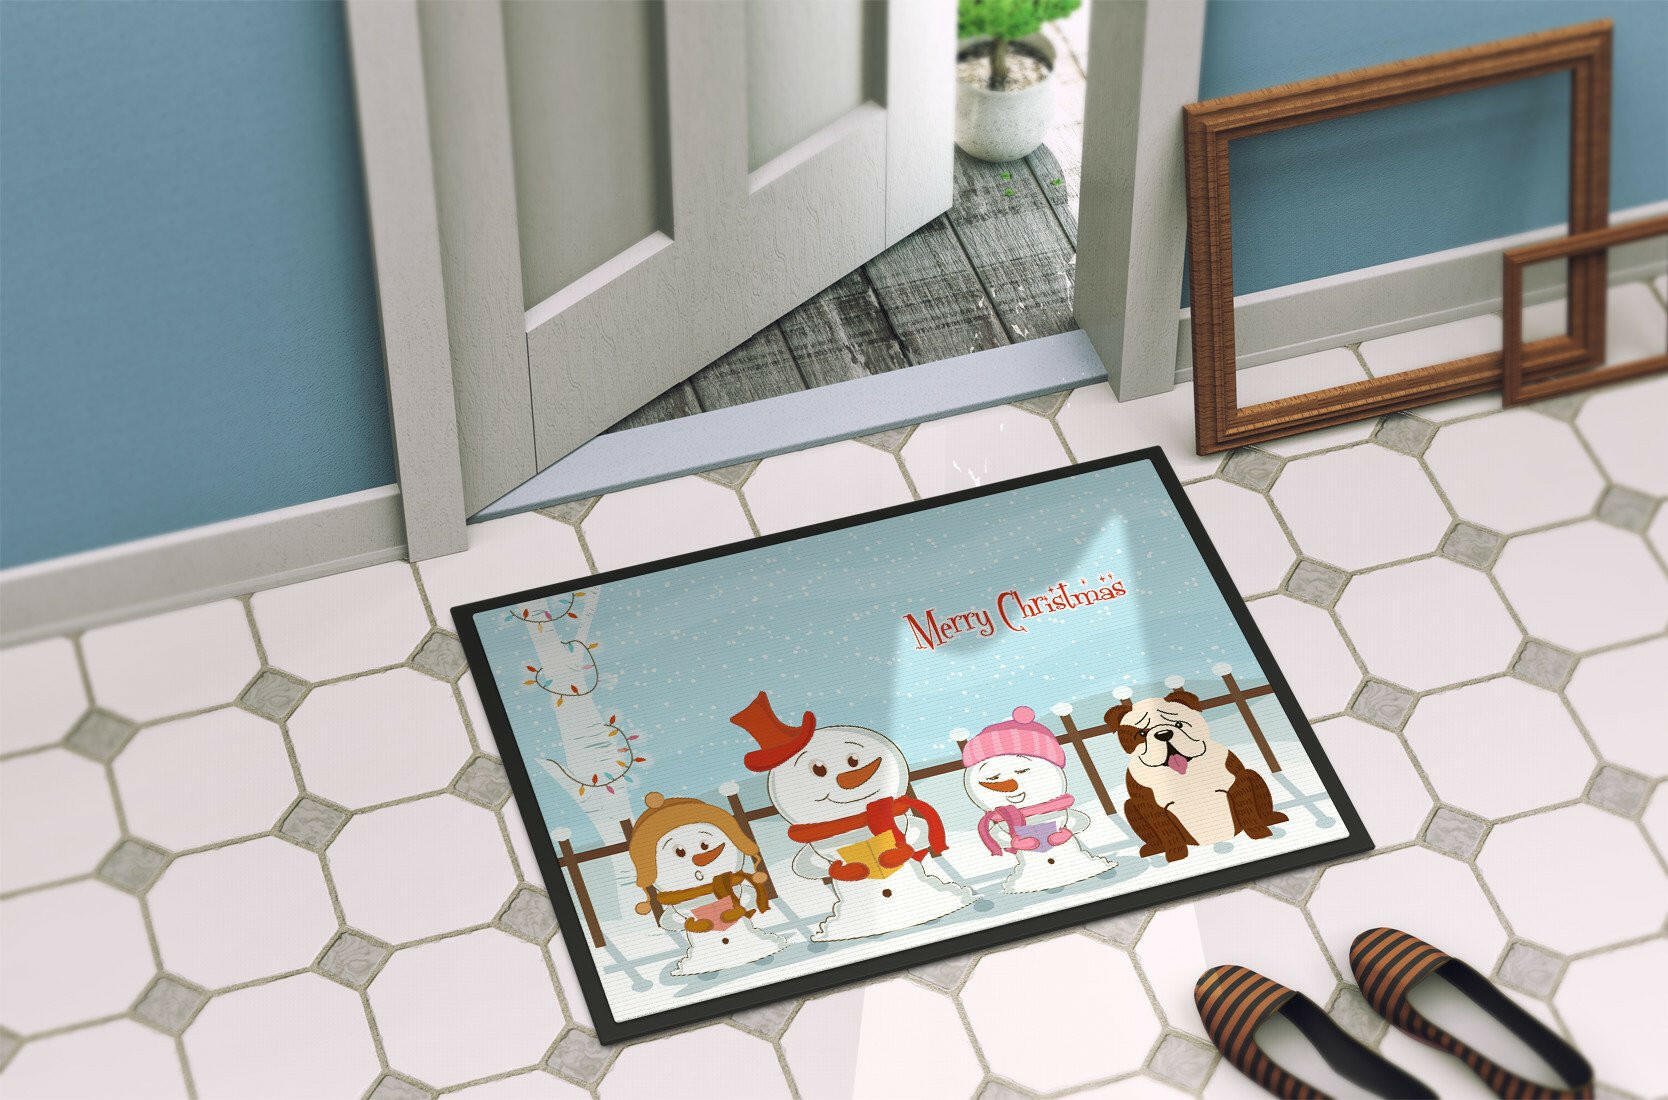 Merry Christmas Carolers English Bulldog Brindle White Indoor or Outdoor Mat 24x36 BB2452JMAT - the-store.com